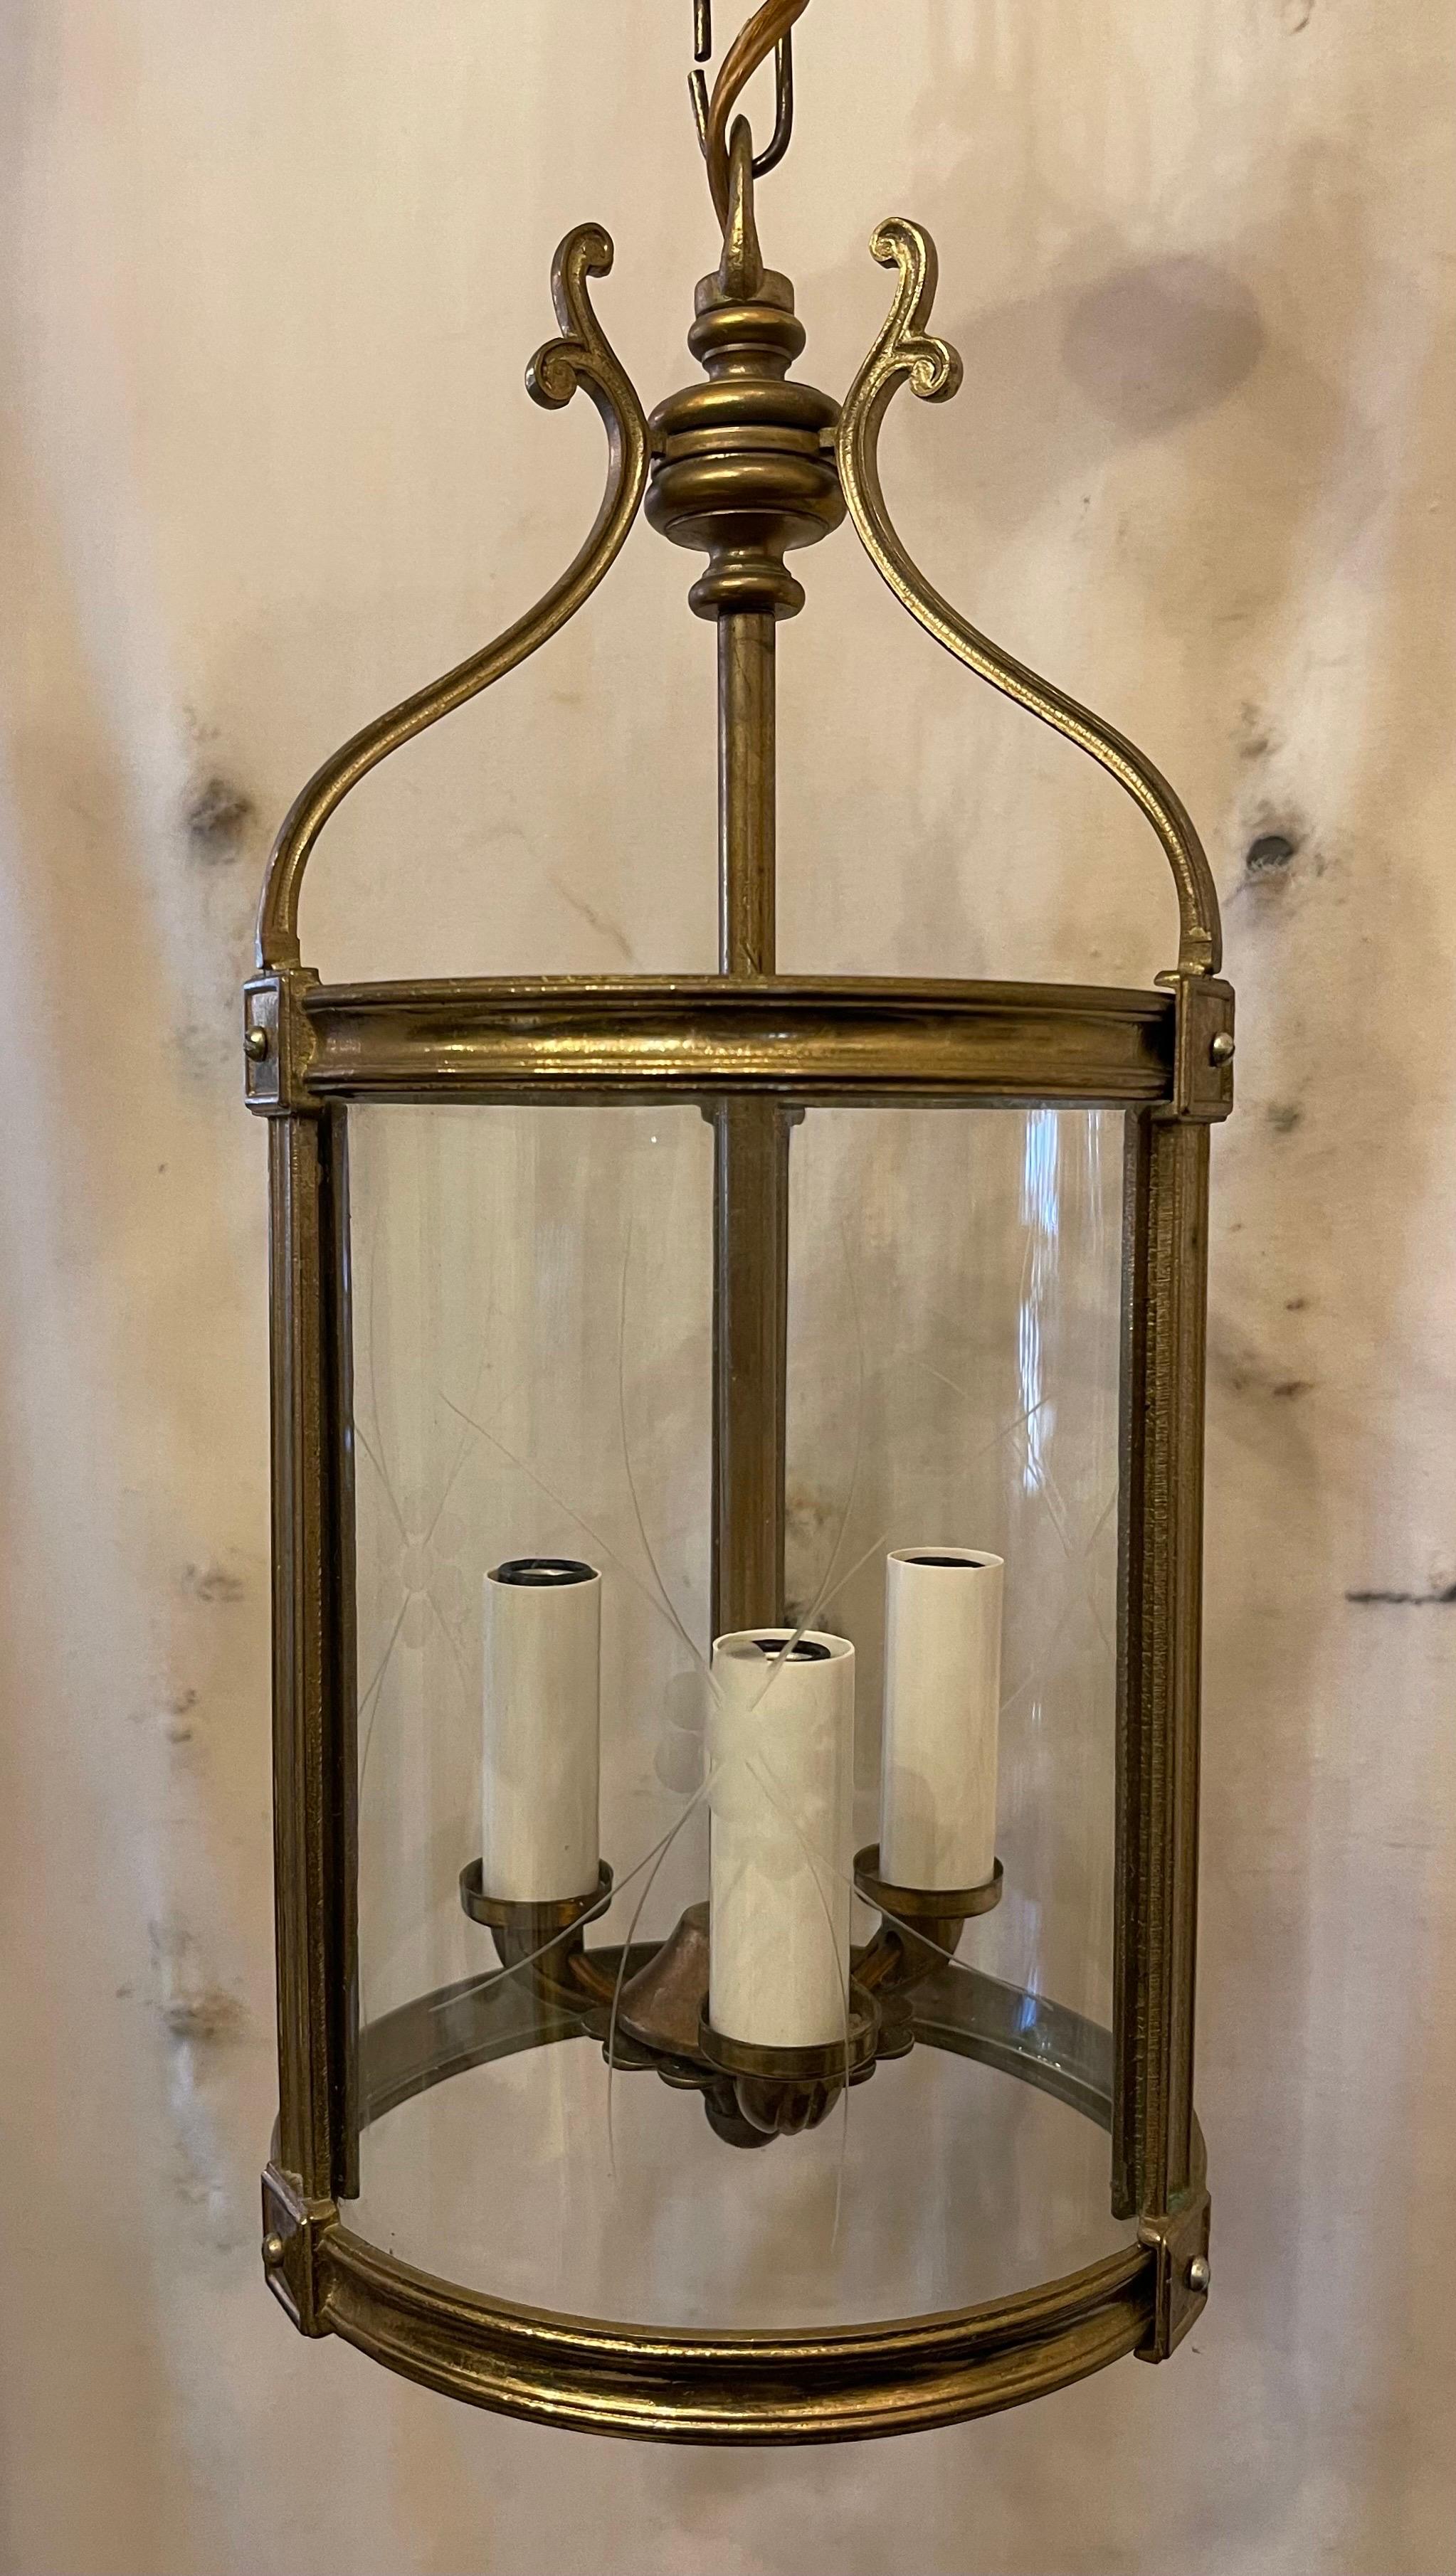 Elegant pair or Petite Bronze / brass Louis XVI Style Neoclassical Regency Lanterns Each Of The Fixtures Have A 3 Candelabra Light Cluster And Etched Curved Glass Panels. Accompanied By Canopy And Chain As Well As Mounting Hardware For